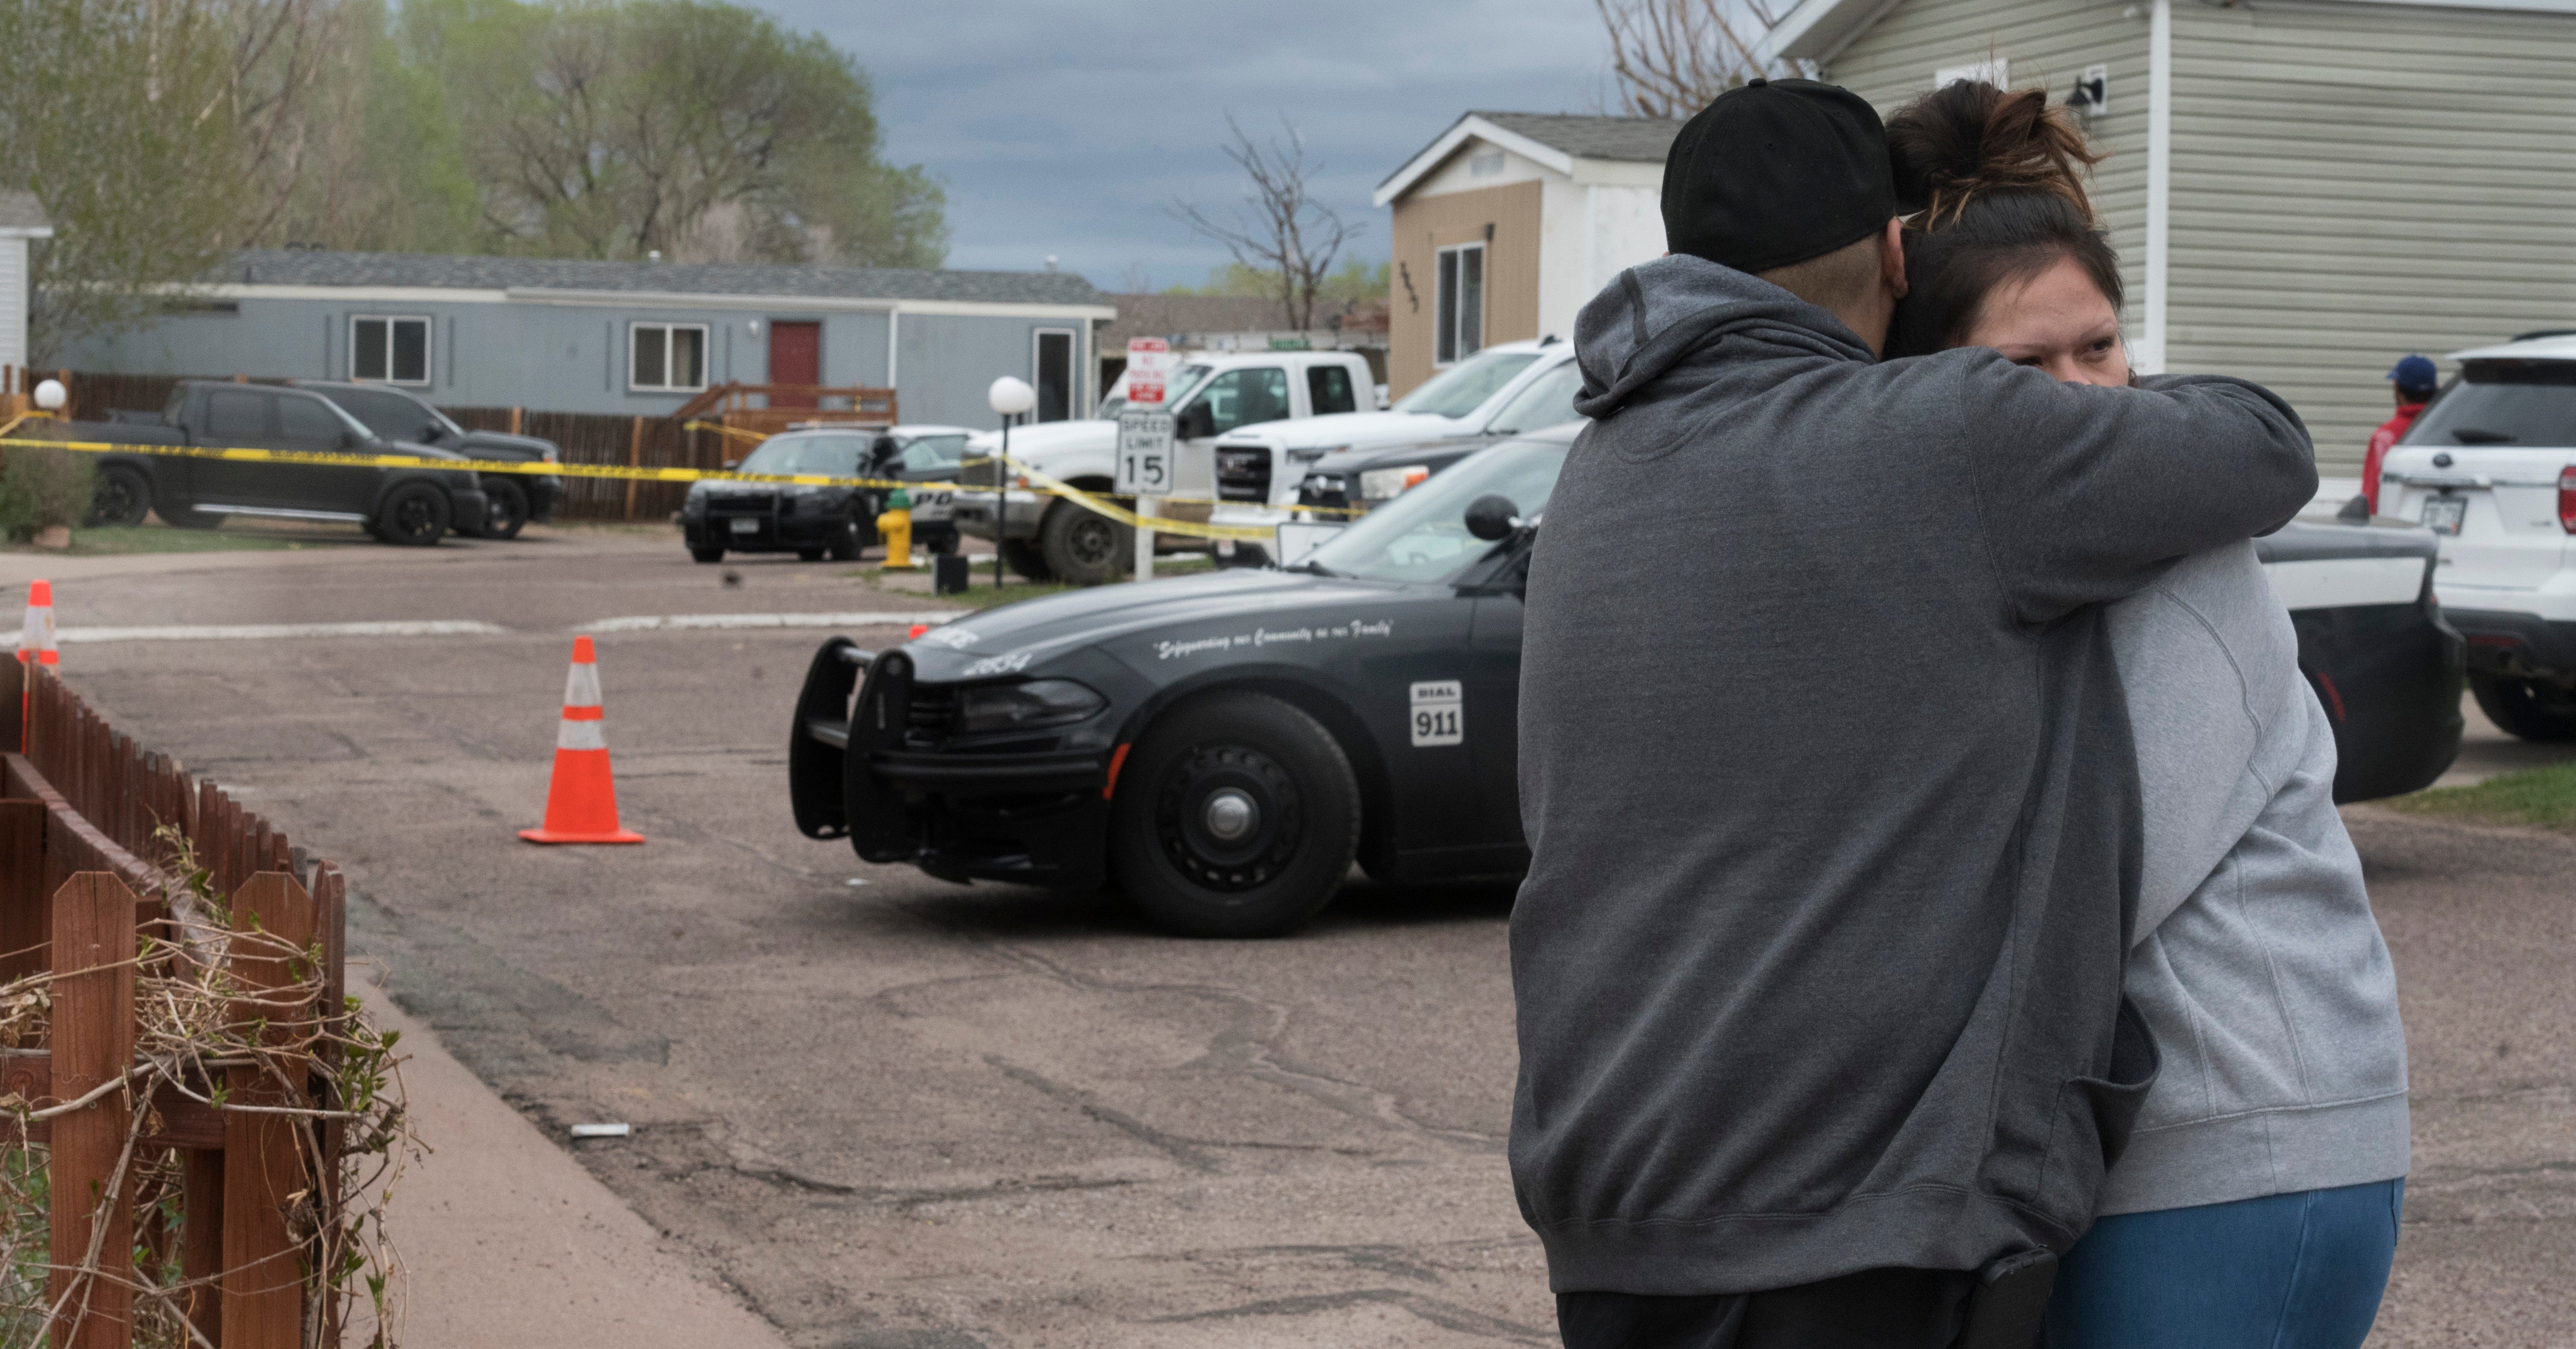 The perpetrator of the Colorado Springs shooting over the weekend was allegedly the boyfriend of one of the birthday party attendees